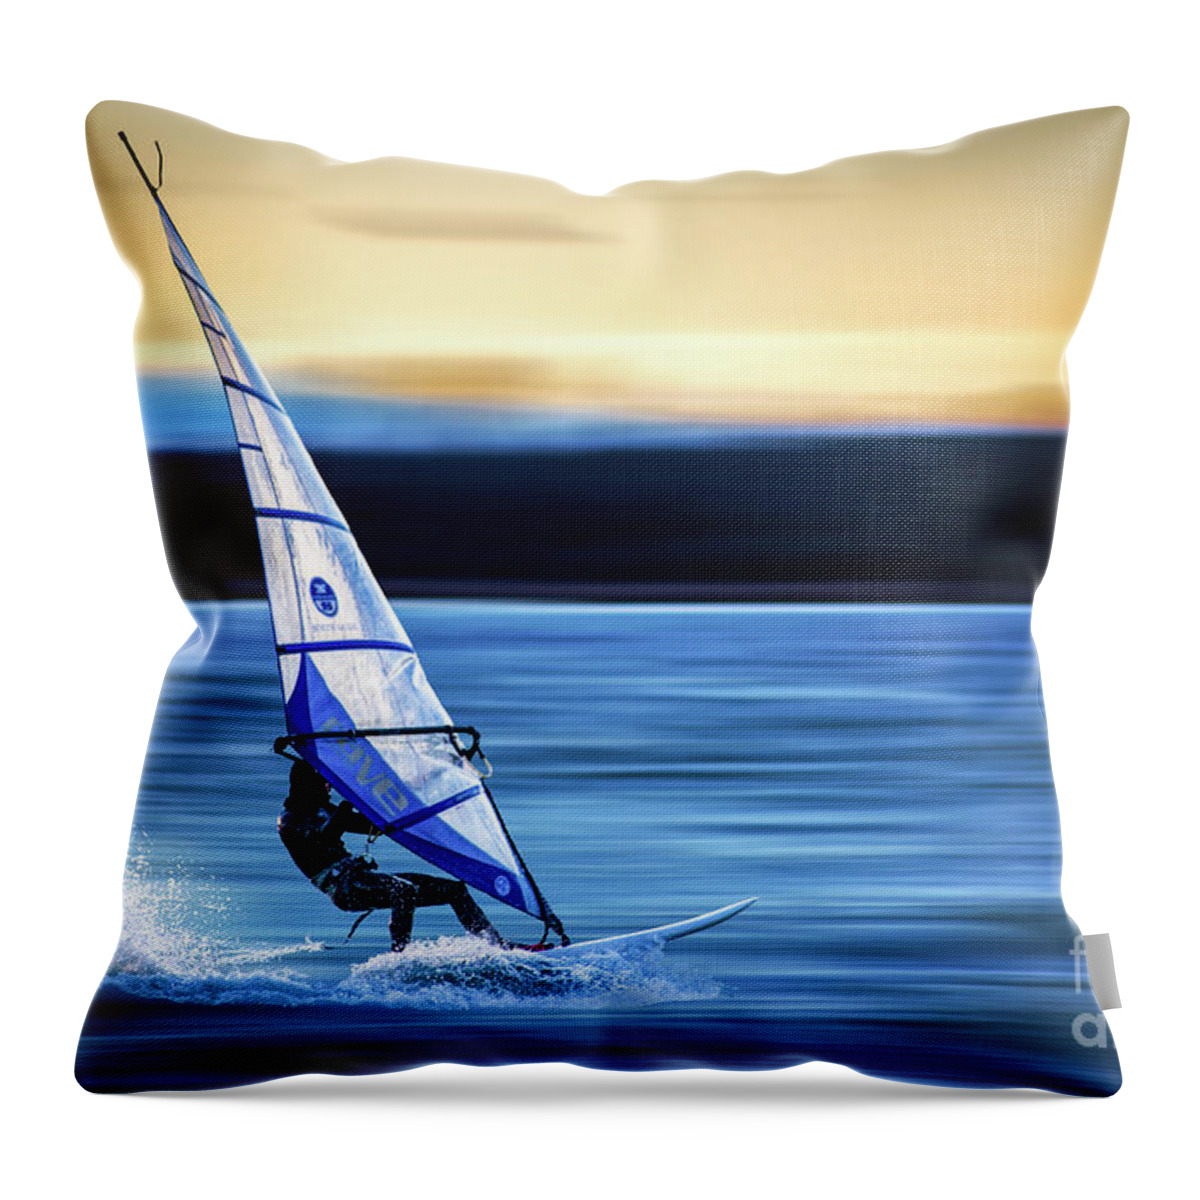 Ammersee Throw Pillow featuring the photograph Looking Forward by Hannes Cmarits